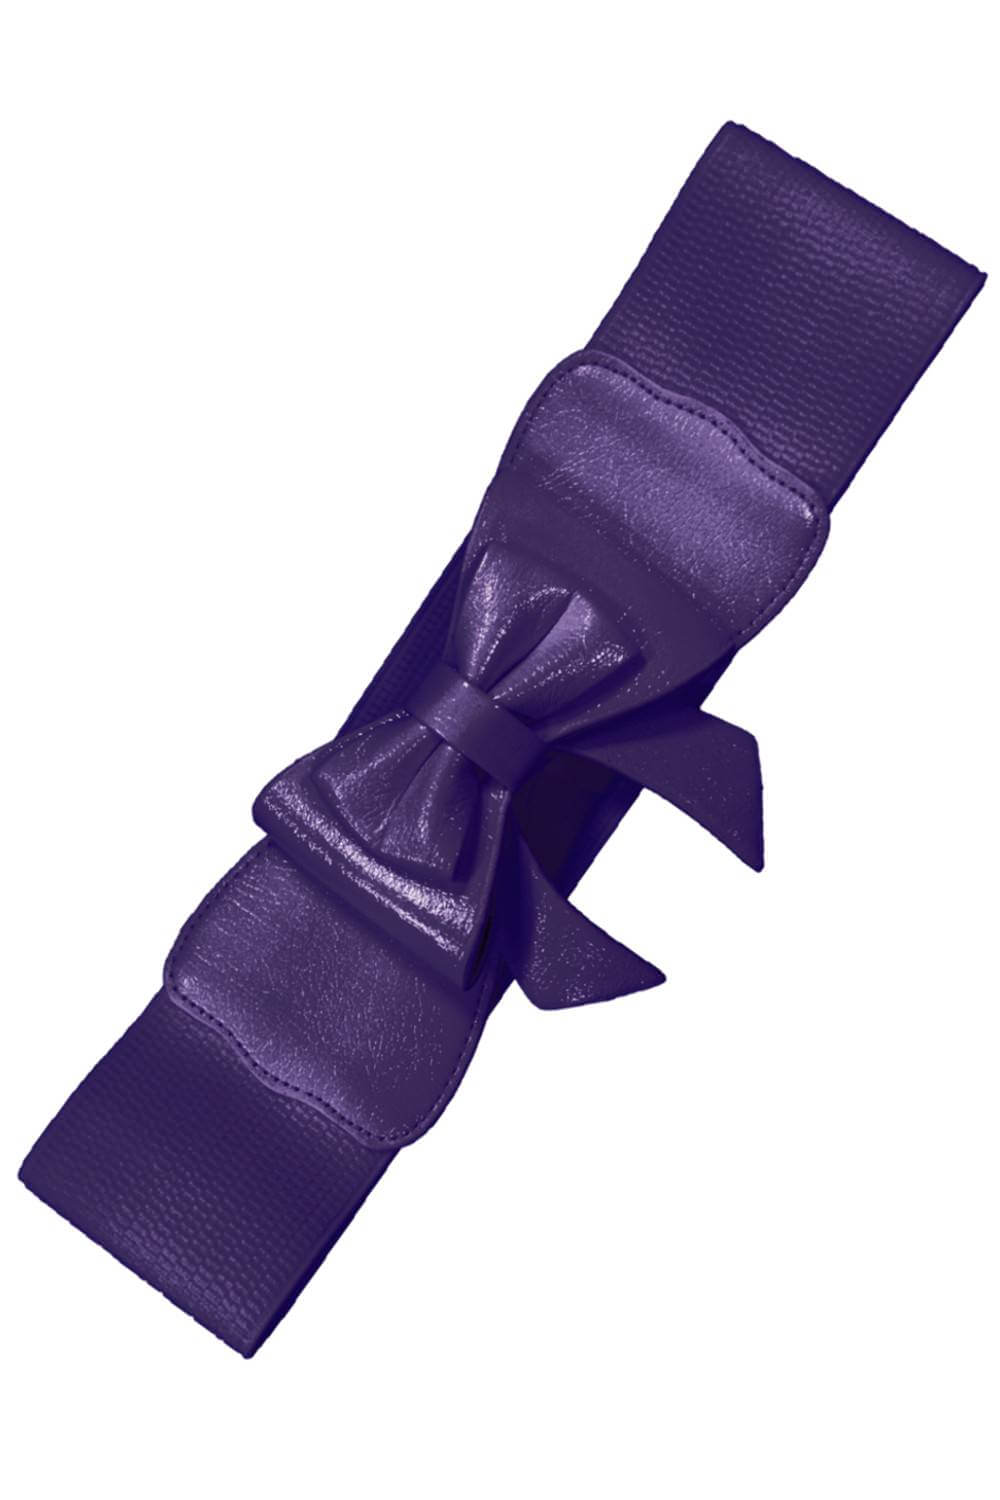 Dancing Days 50s Style Retro Elasticated Belt With Bow In Dark Purple; Dancing Days; 50s Retro Style; Elasticated Belt; Dark Purple Bow Design; Purple